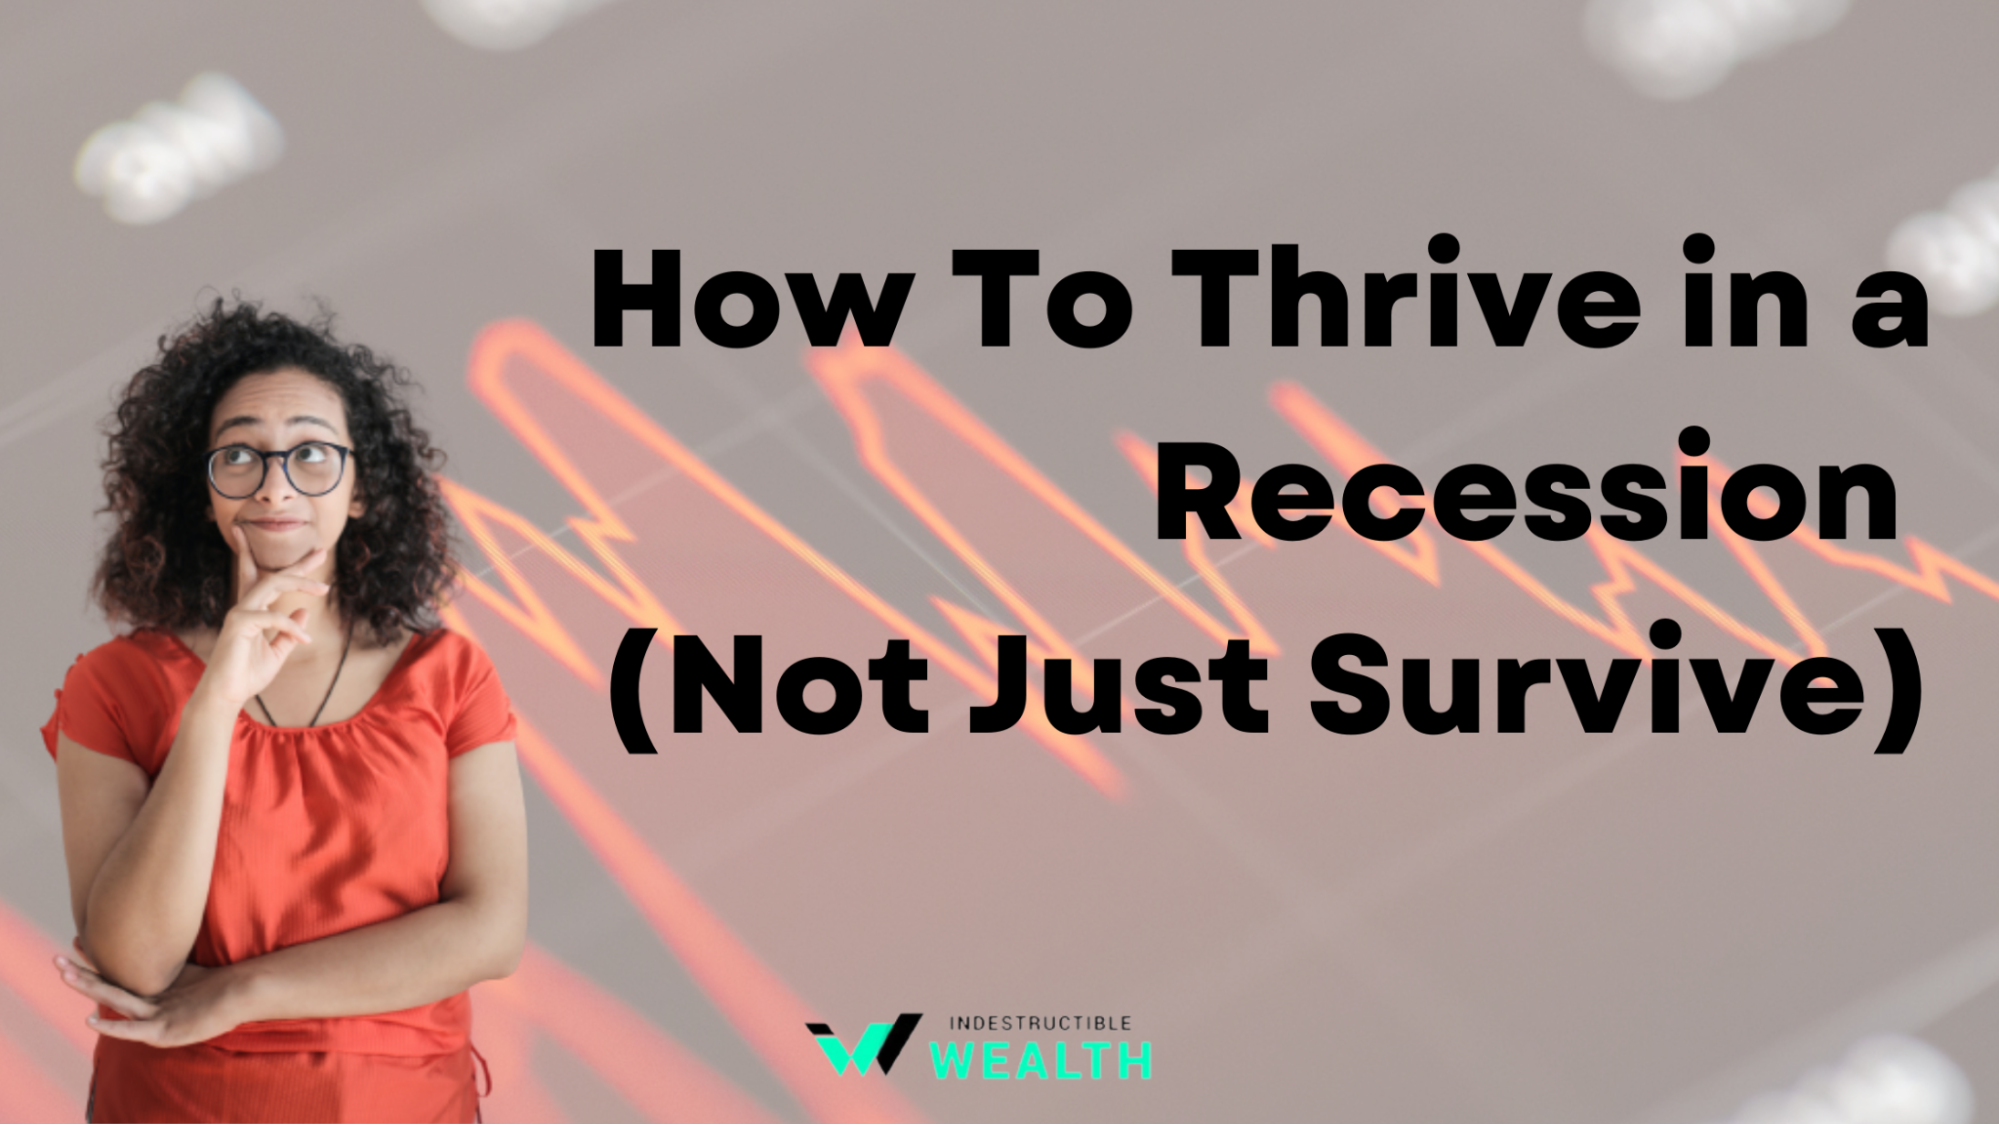 How To Thrive in a Recession (Not Just Survive)